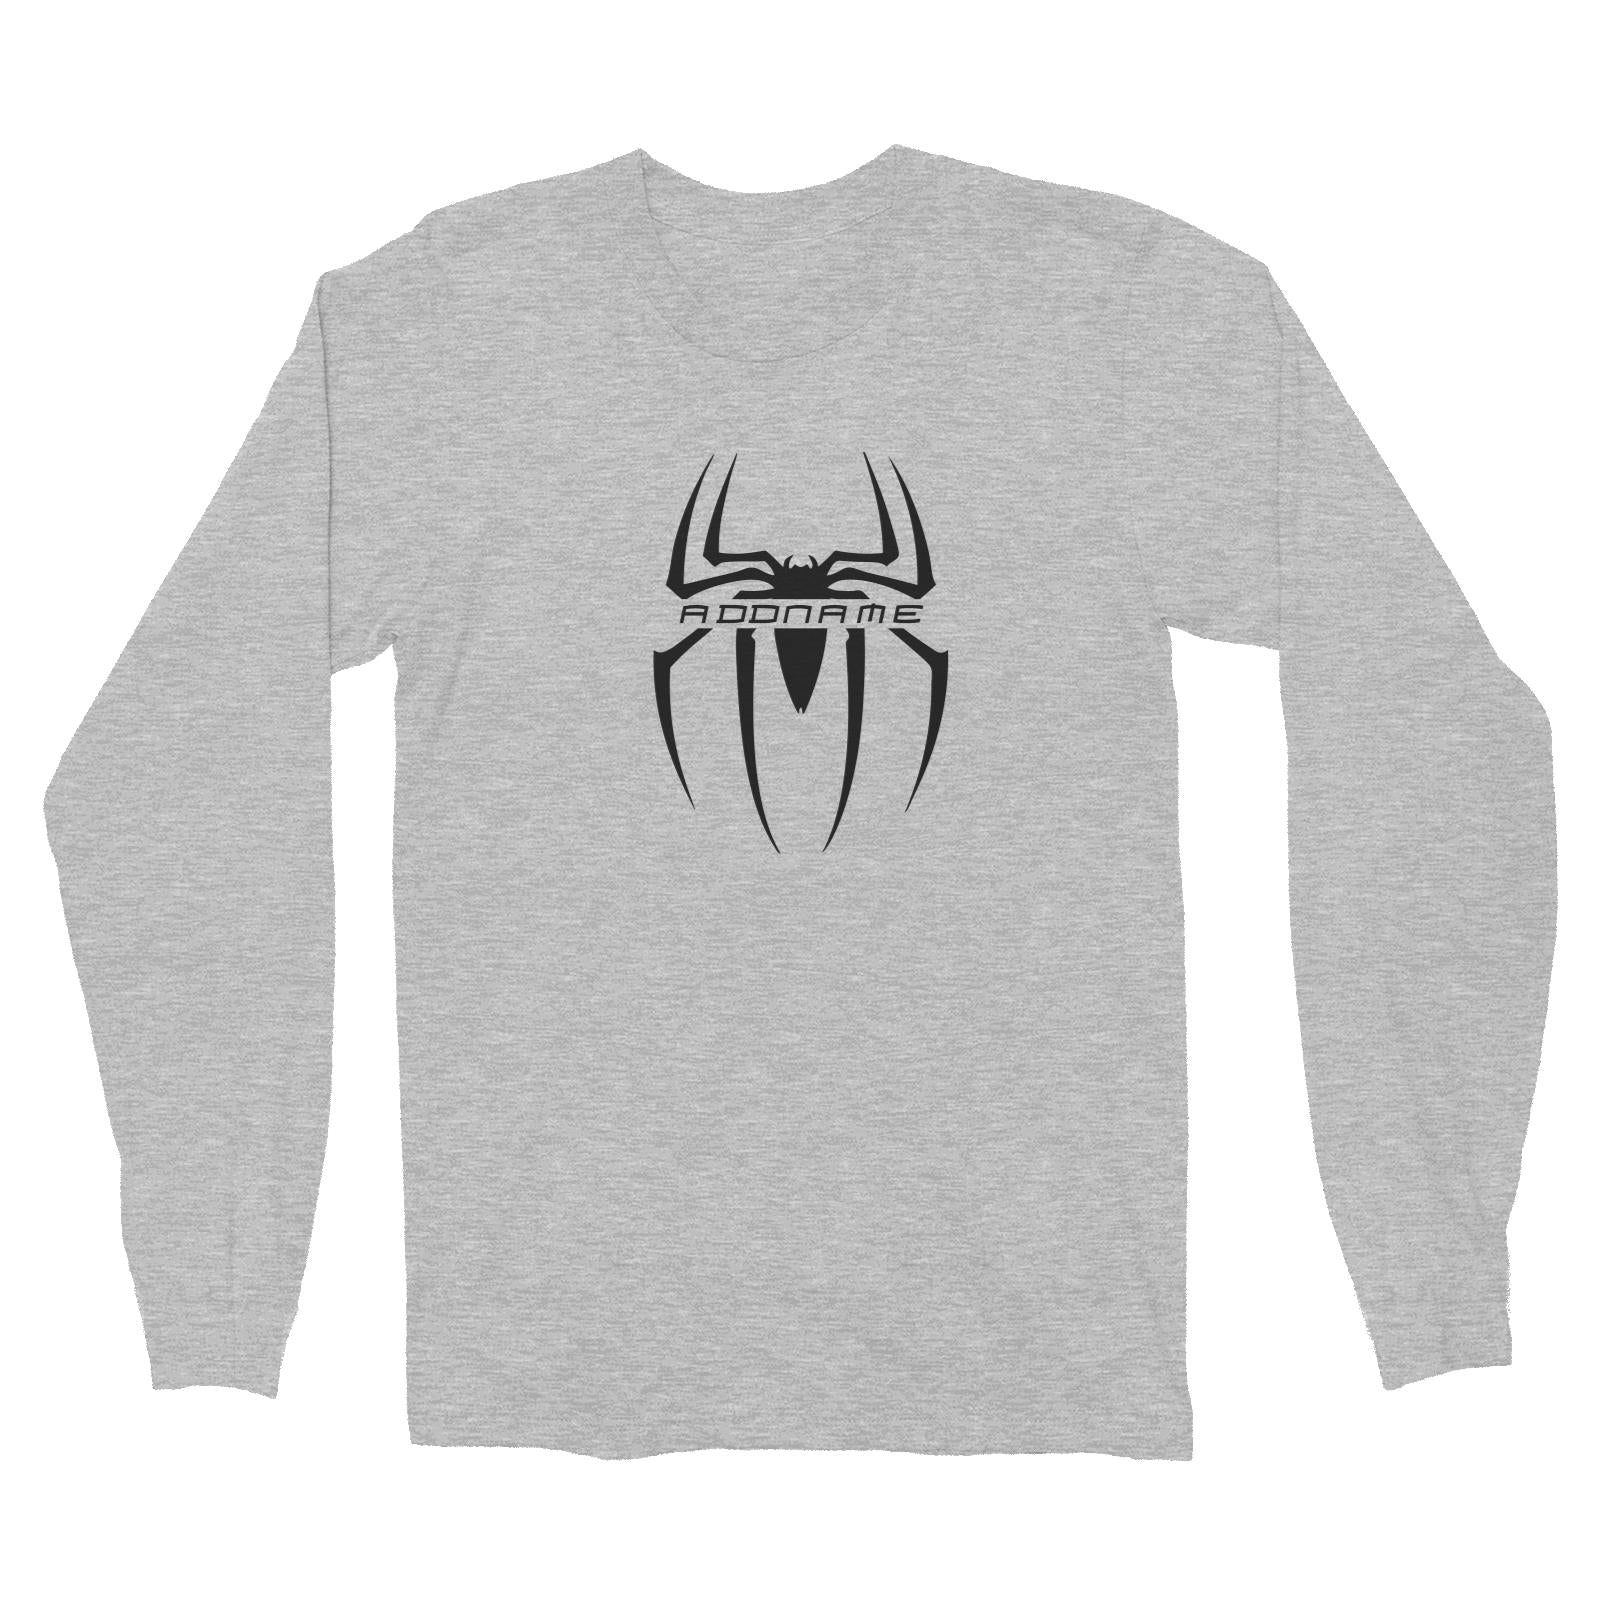 Superhero Spiderman Addname Long Sleeve Unisex T-Shirt  Matching Family Personalizable Designs